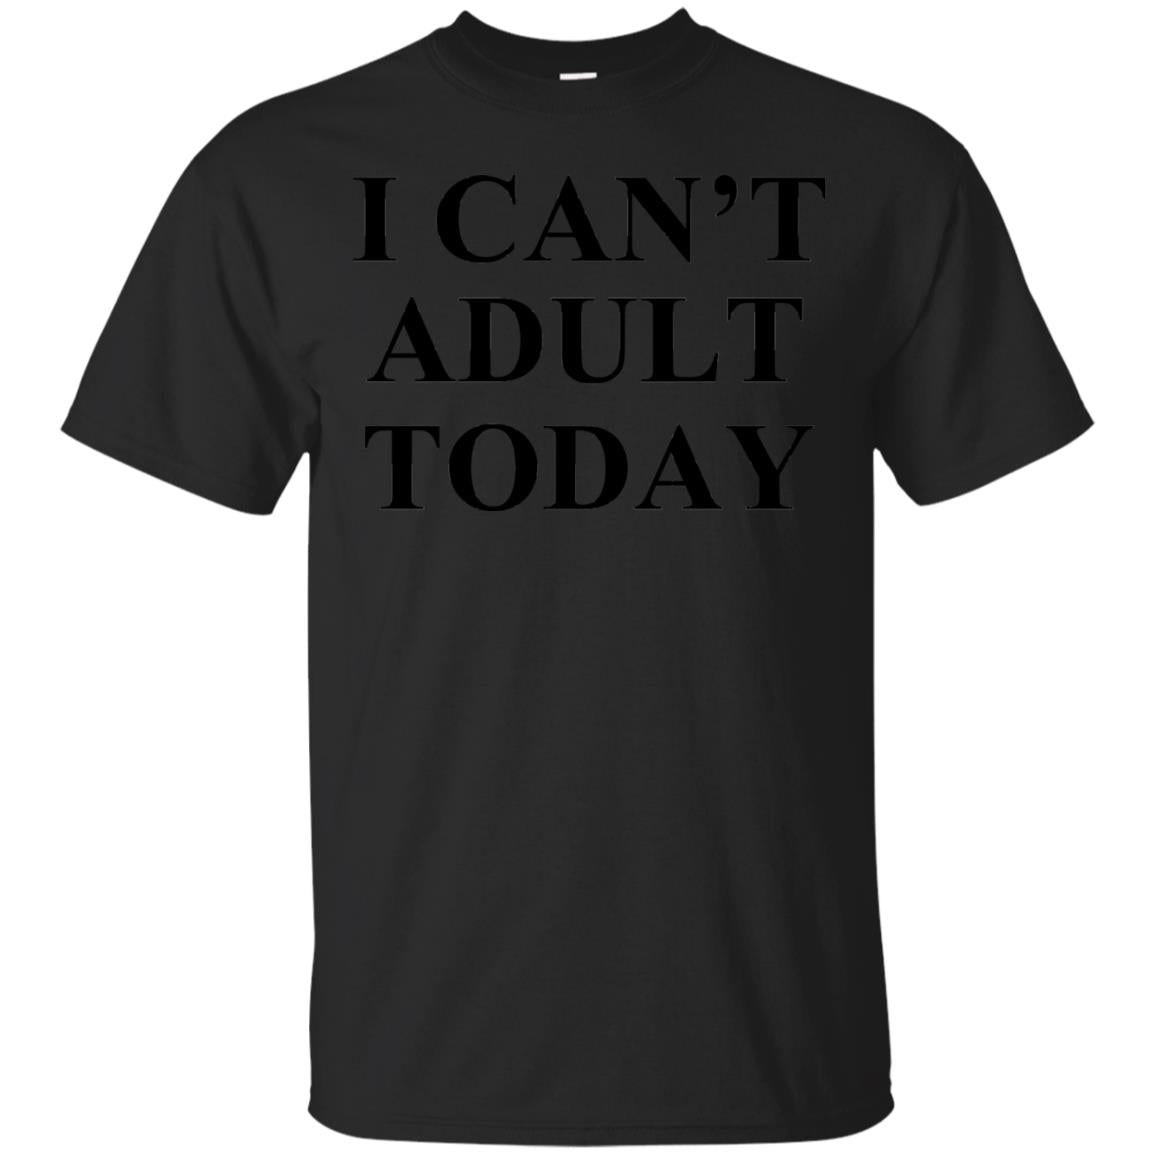 I Cant Adult Today Shirts